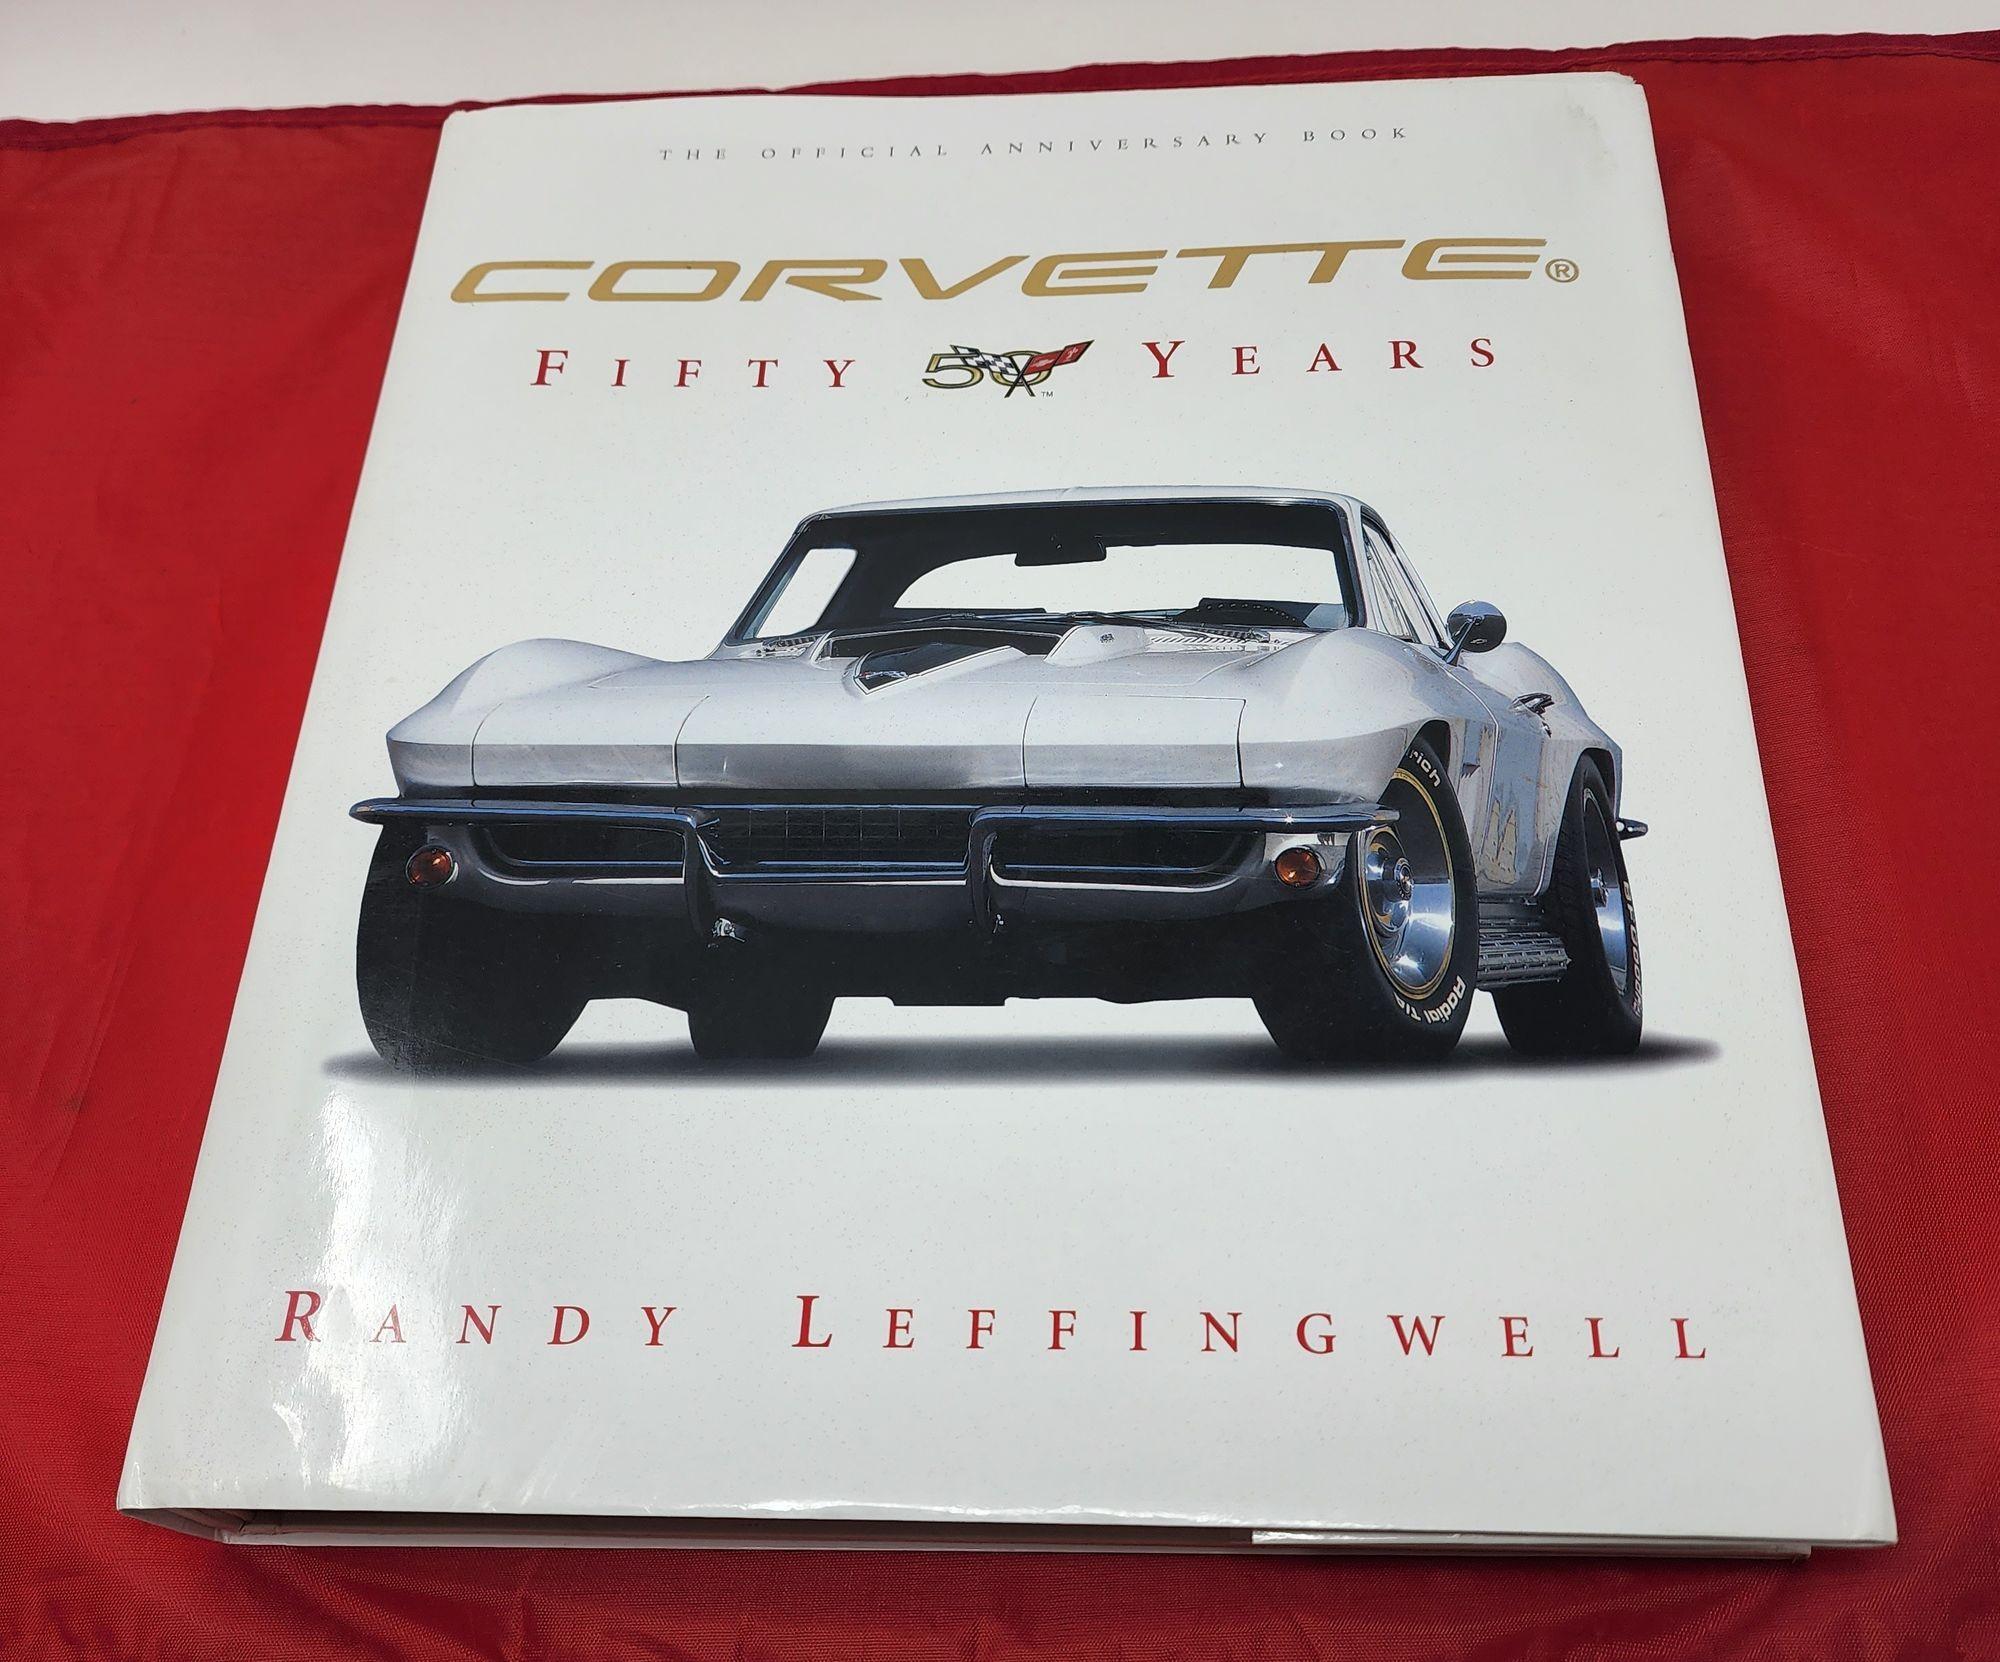 Corvette Fifty Years by Randy Leffingwell.2002, Hardcover, Revised edition.Covering 50 full years of Corvette history, this book features stunning color photographs from master lensman Randy. Leffingwell.Officially licensed by General Motors,